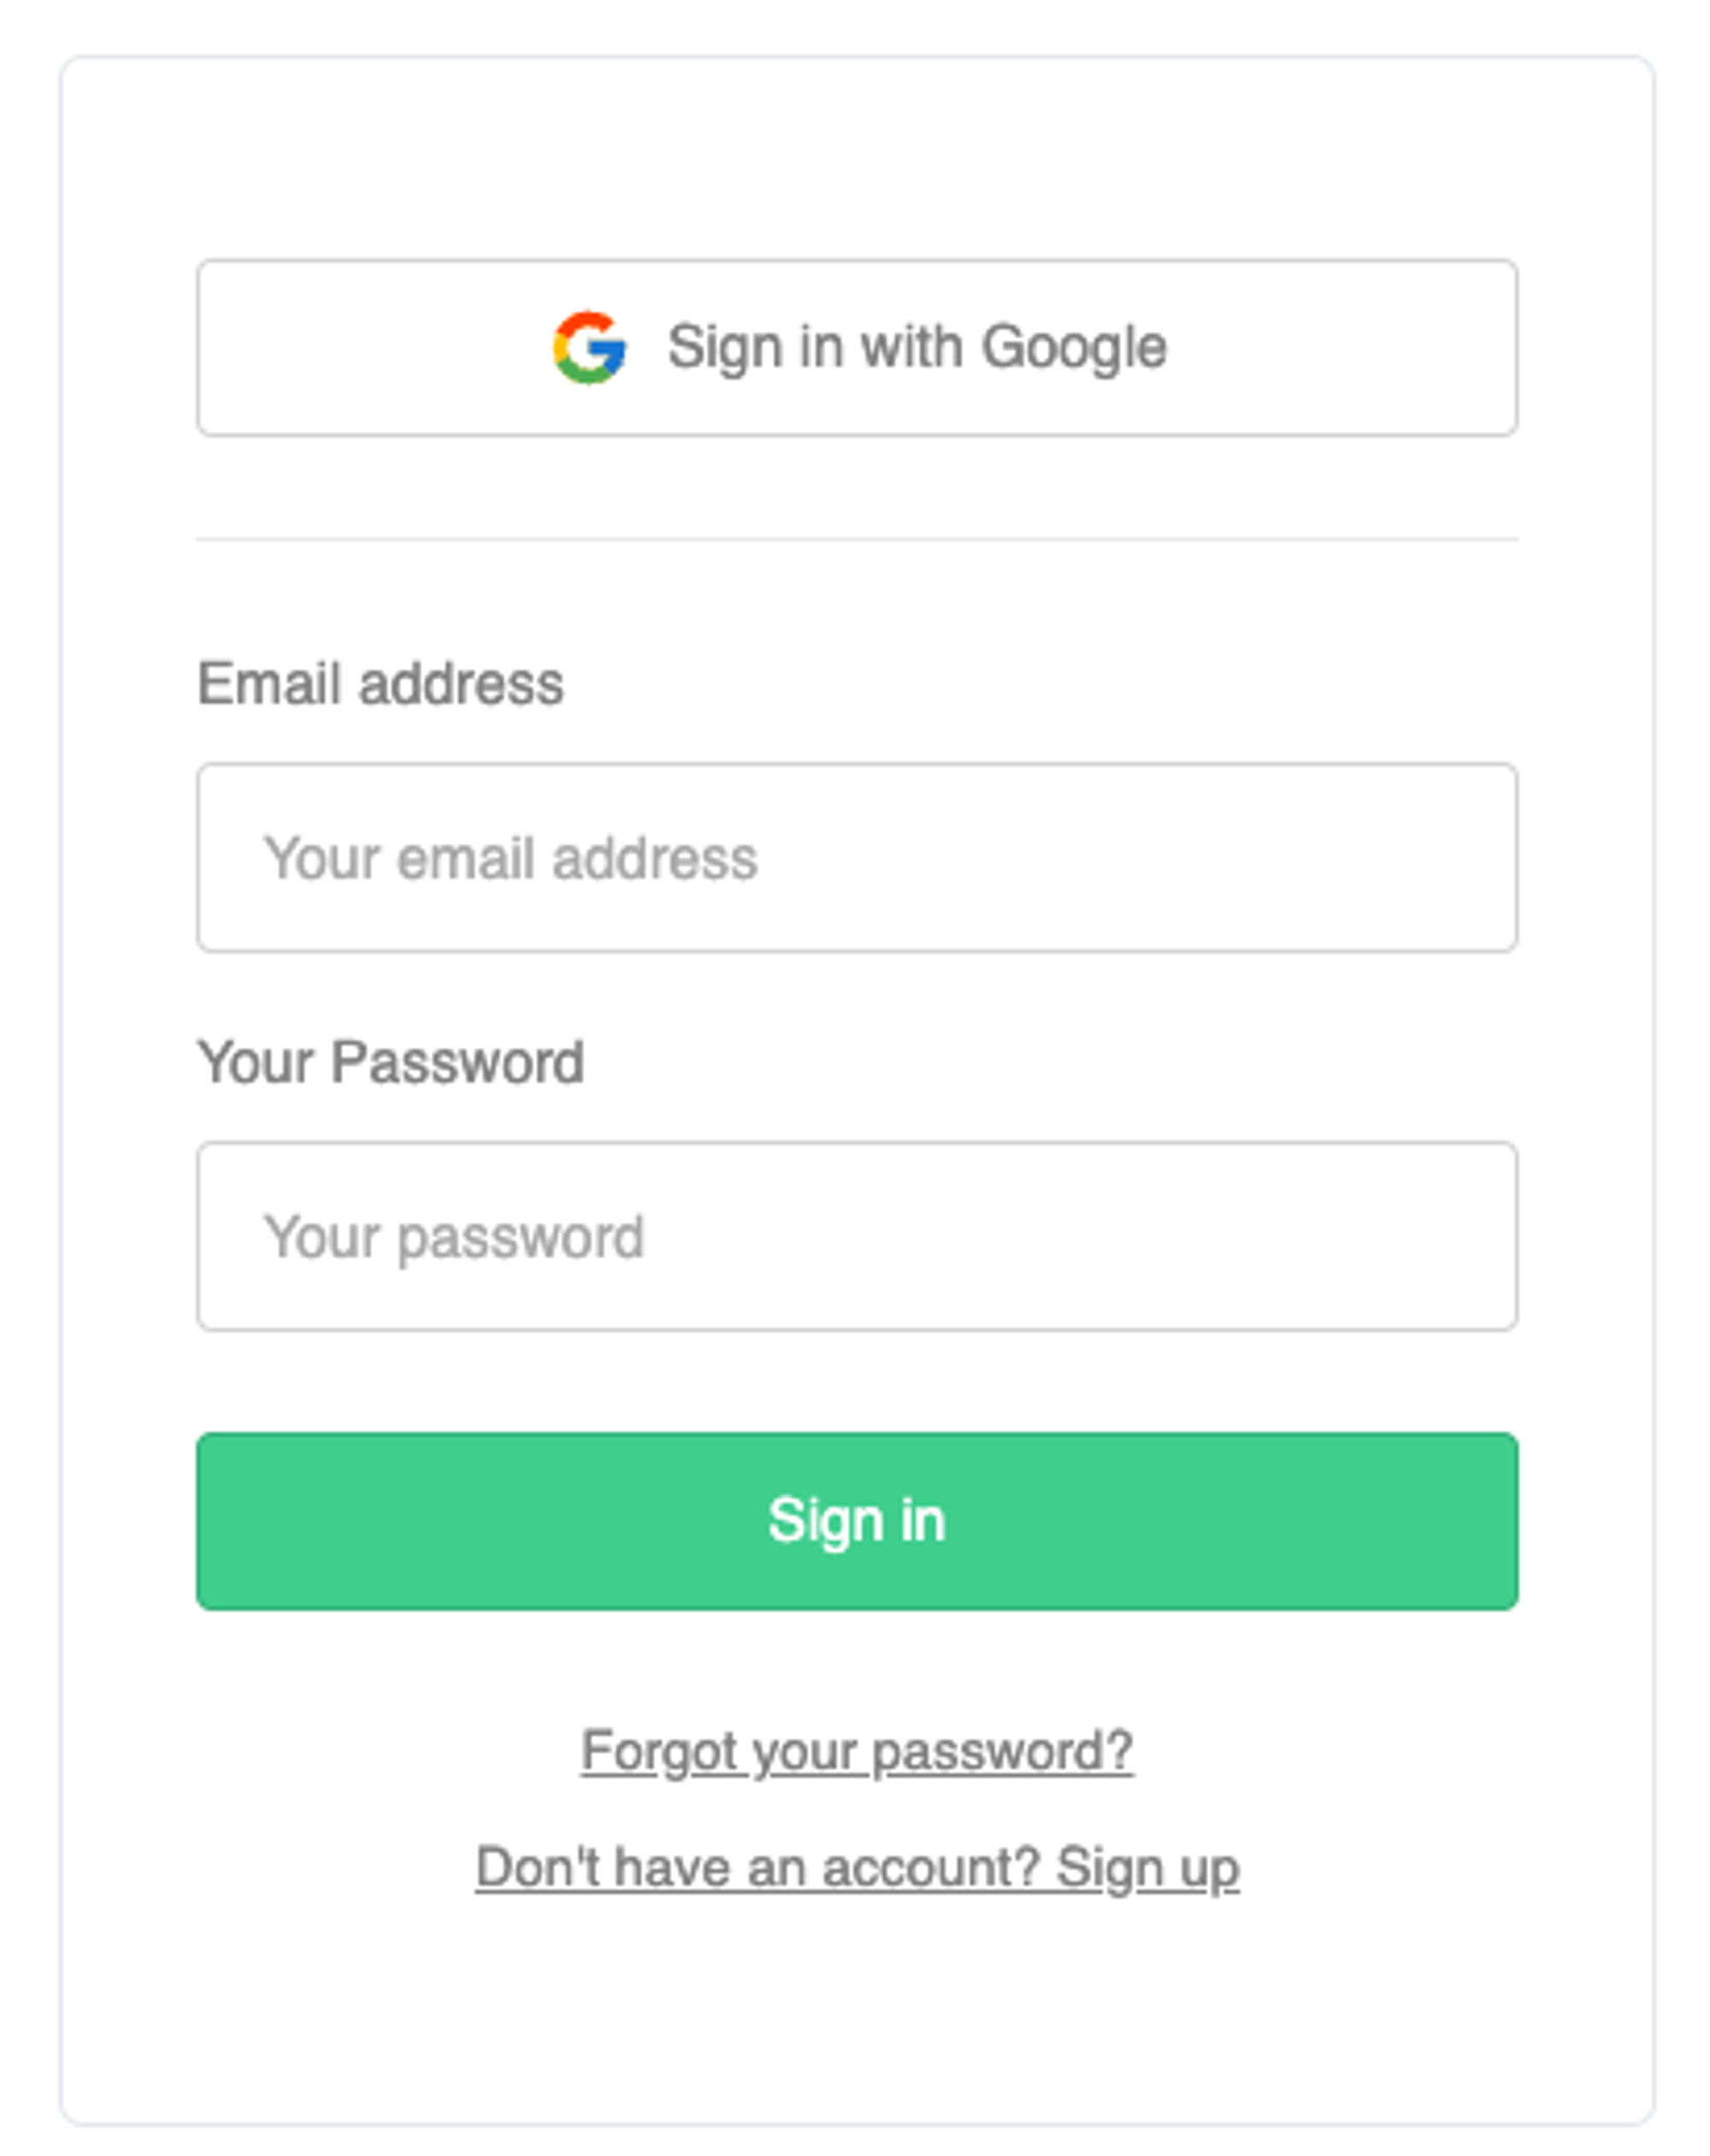 You can login simply by Google account.